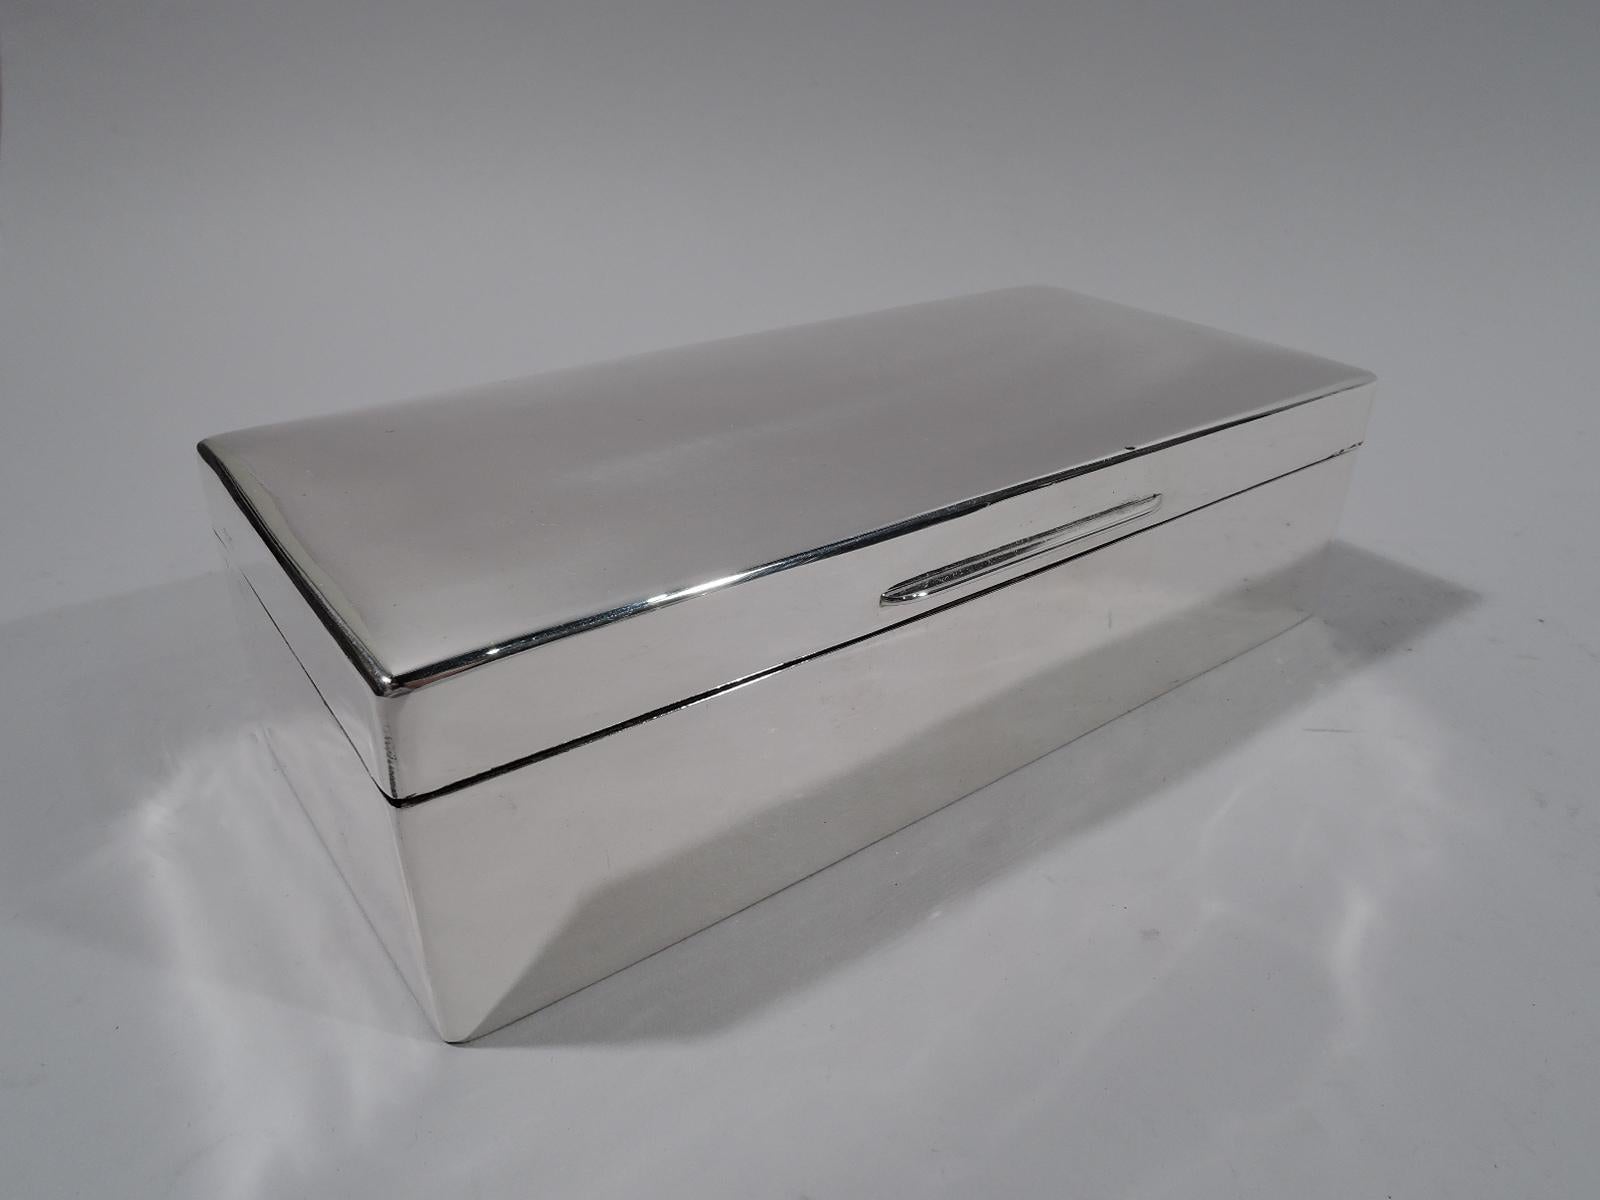 George V sterling silver desk box. Made by Charles Boyton & Son in London in 1924. Rectangular with straight sides. Cover hinged and gently curved with linear tab. Box and cover interior cedar lined and partitioned. Underside leather lined. Fully